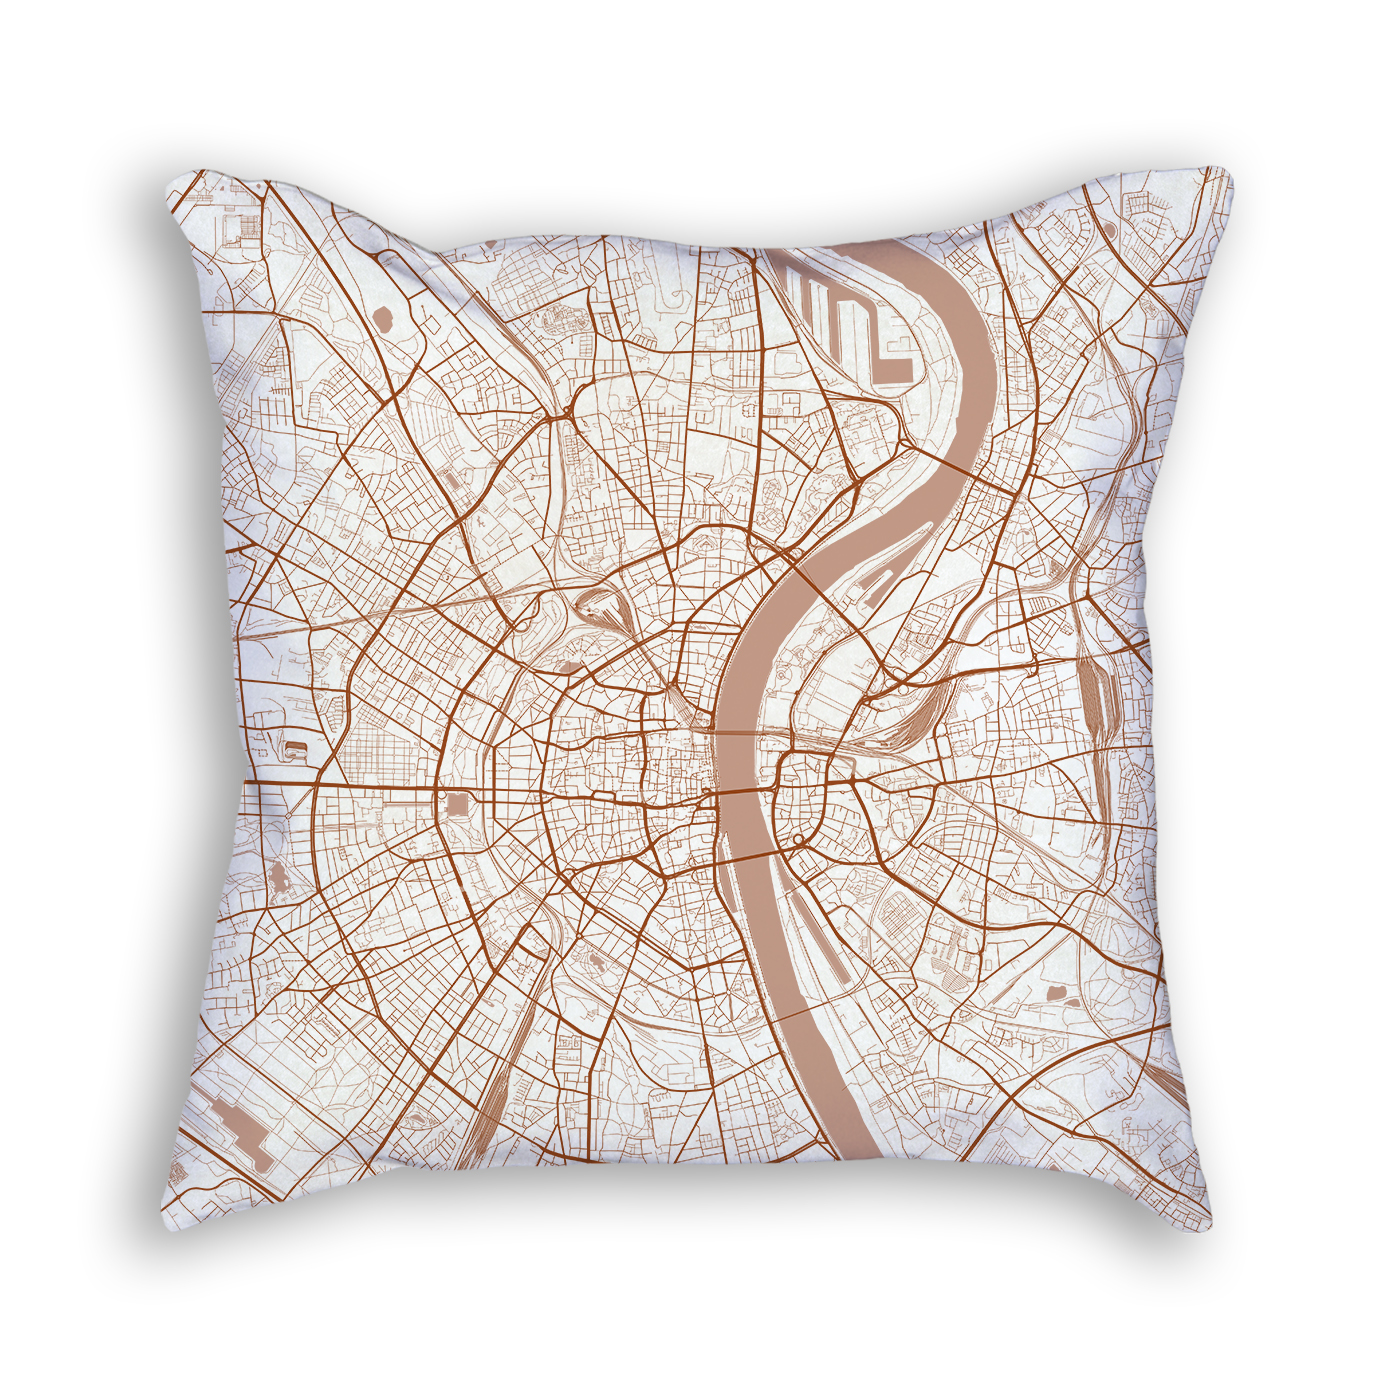 Cologne Germany City Map Art Decorative Throw Pillow